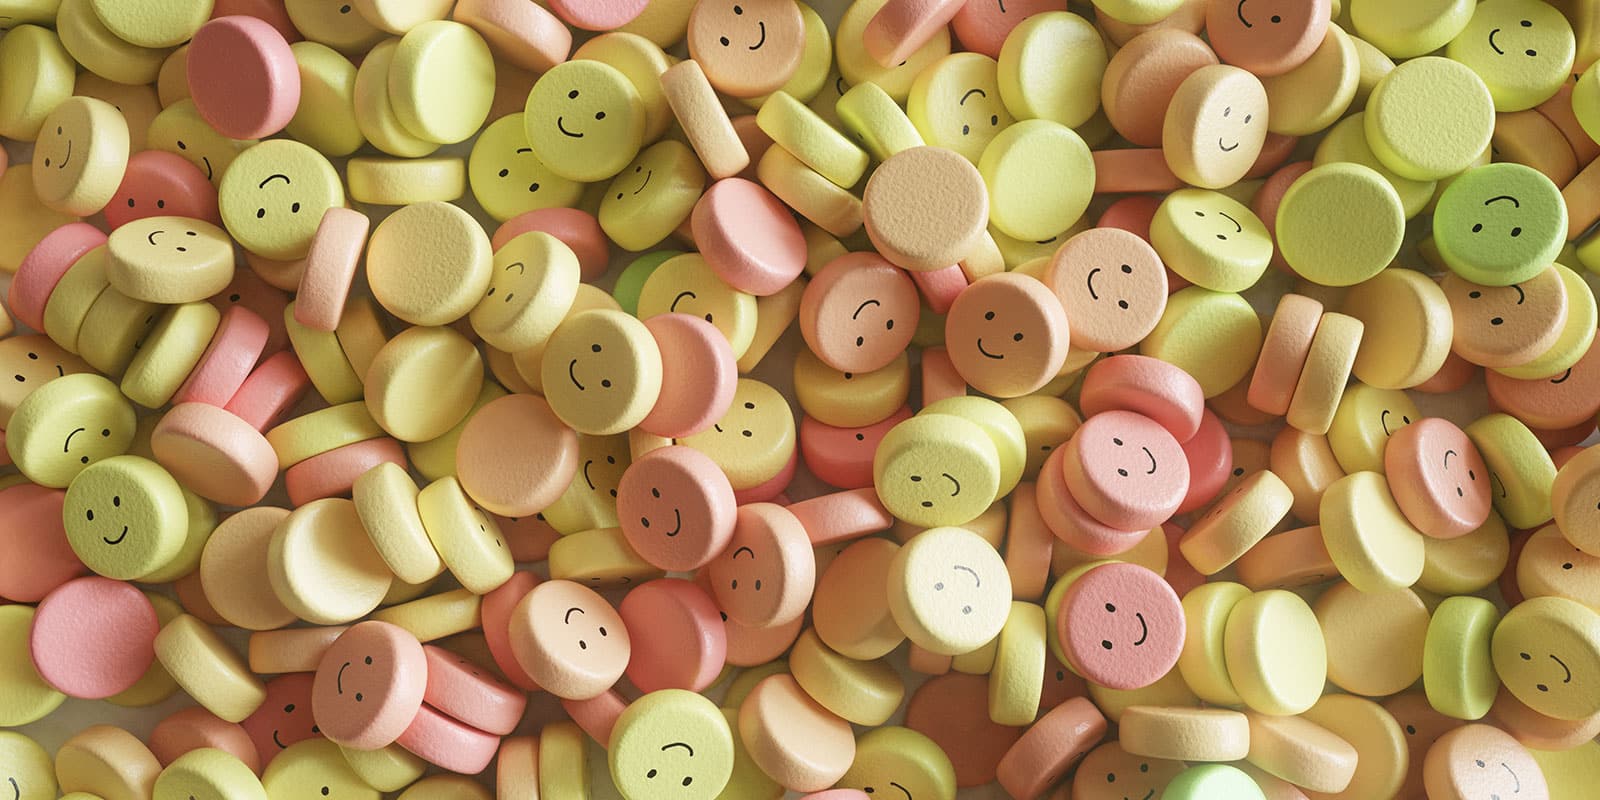 Weaning/tapering off Antidepressants